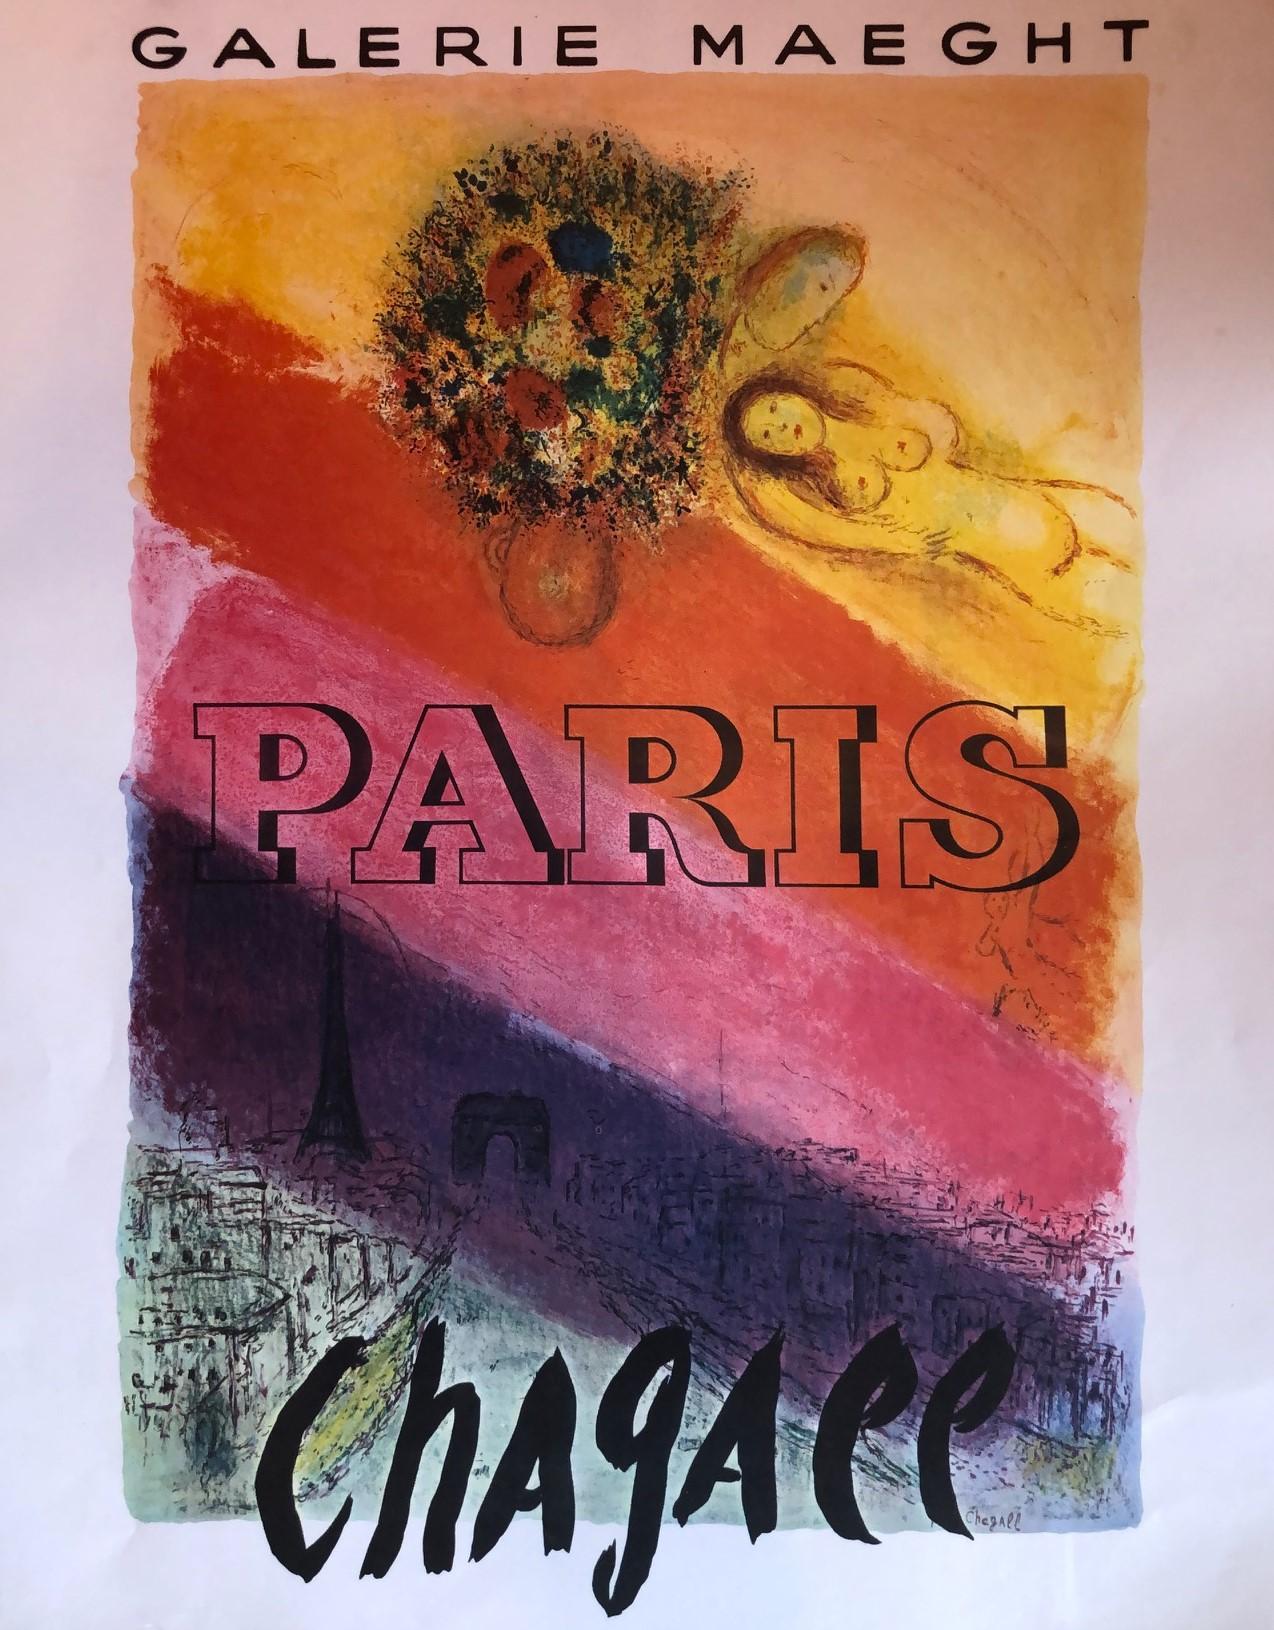 Highly collectible midcentury Marc Chagall Galerie Maeght, Paris lithograph exhibition poster, circa 1950s. The piece is from the French Posters collection and is in very nice unframed condition with limited handling. Beautiful abstract images with